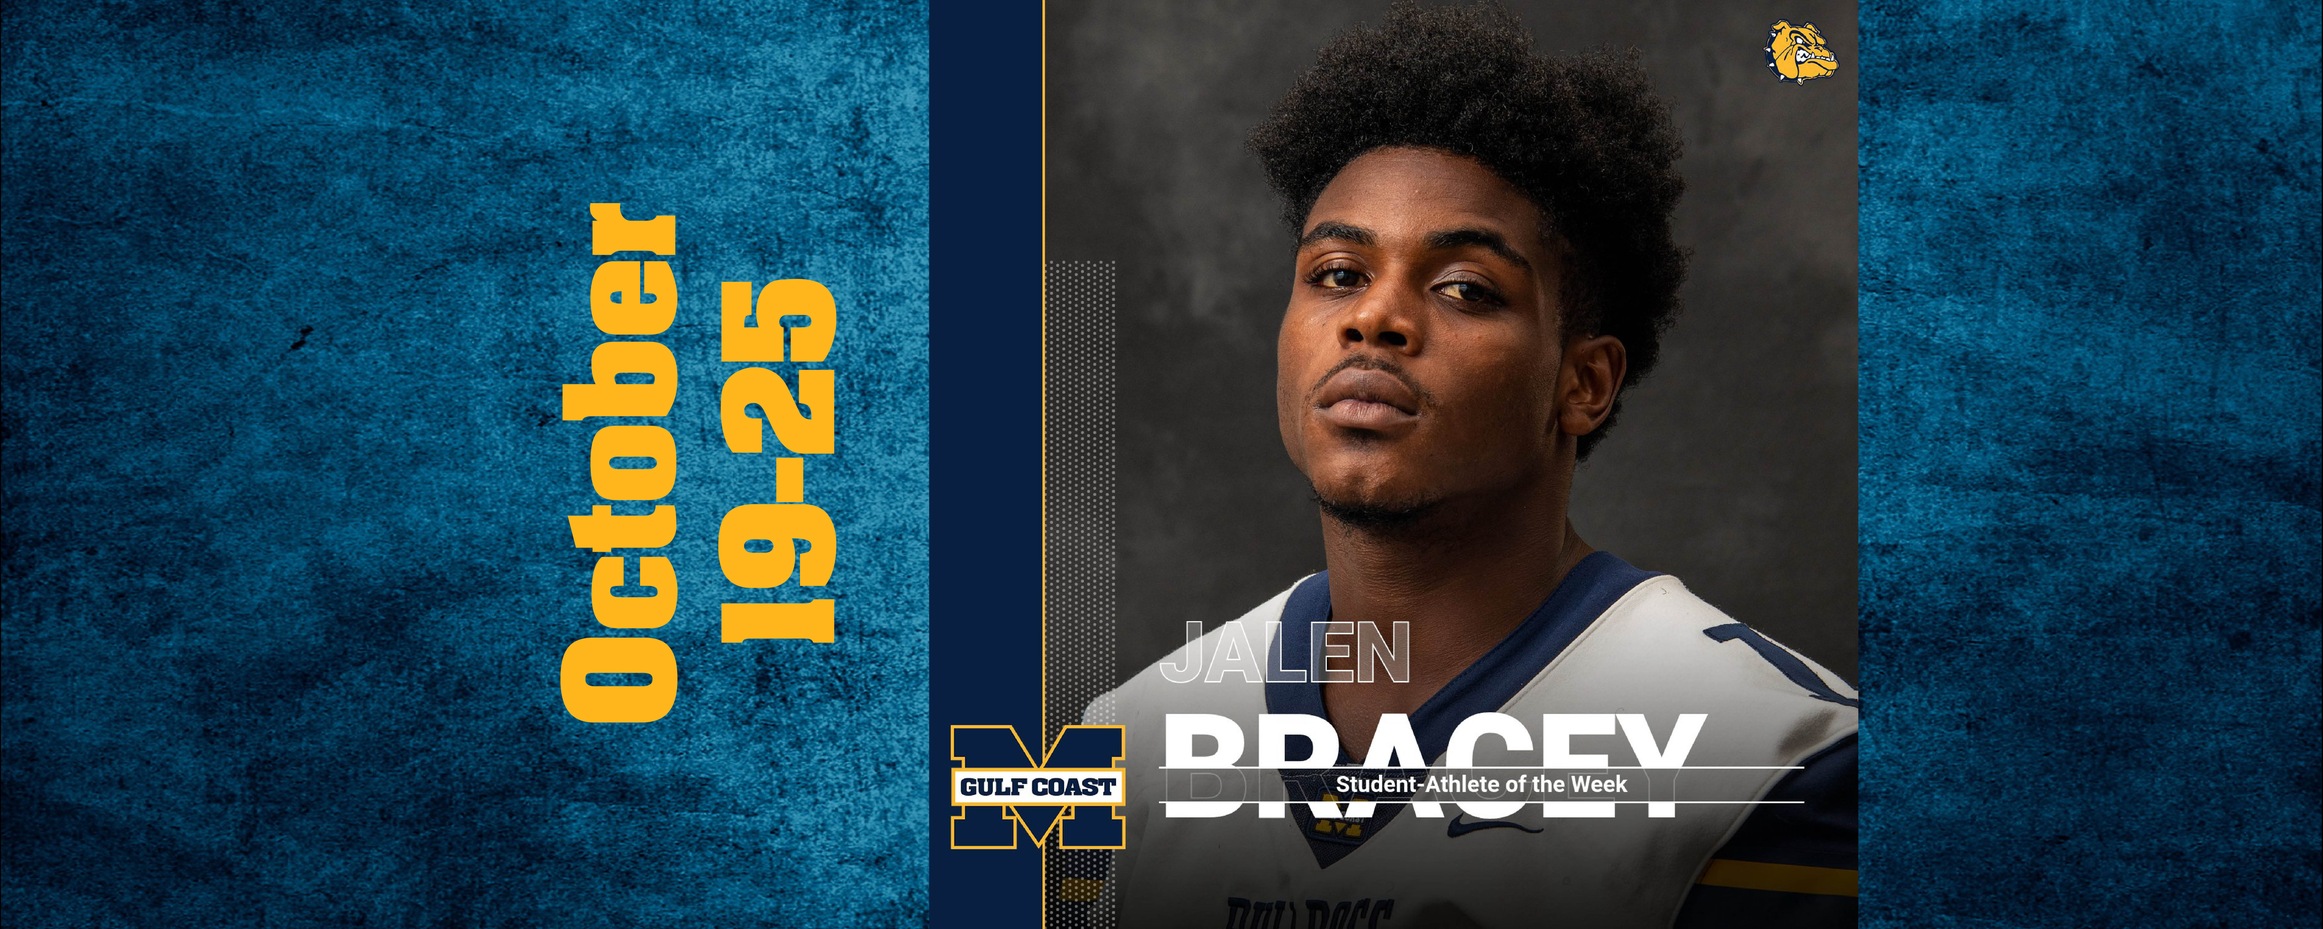 Bracey named MGCCC Student-Athlete of the Week